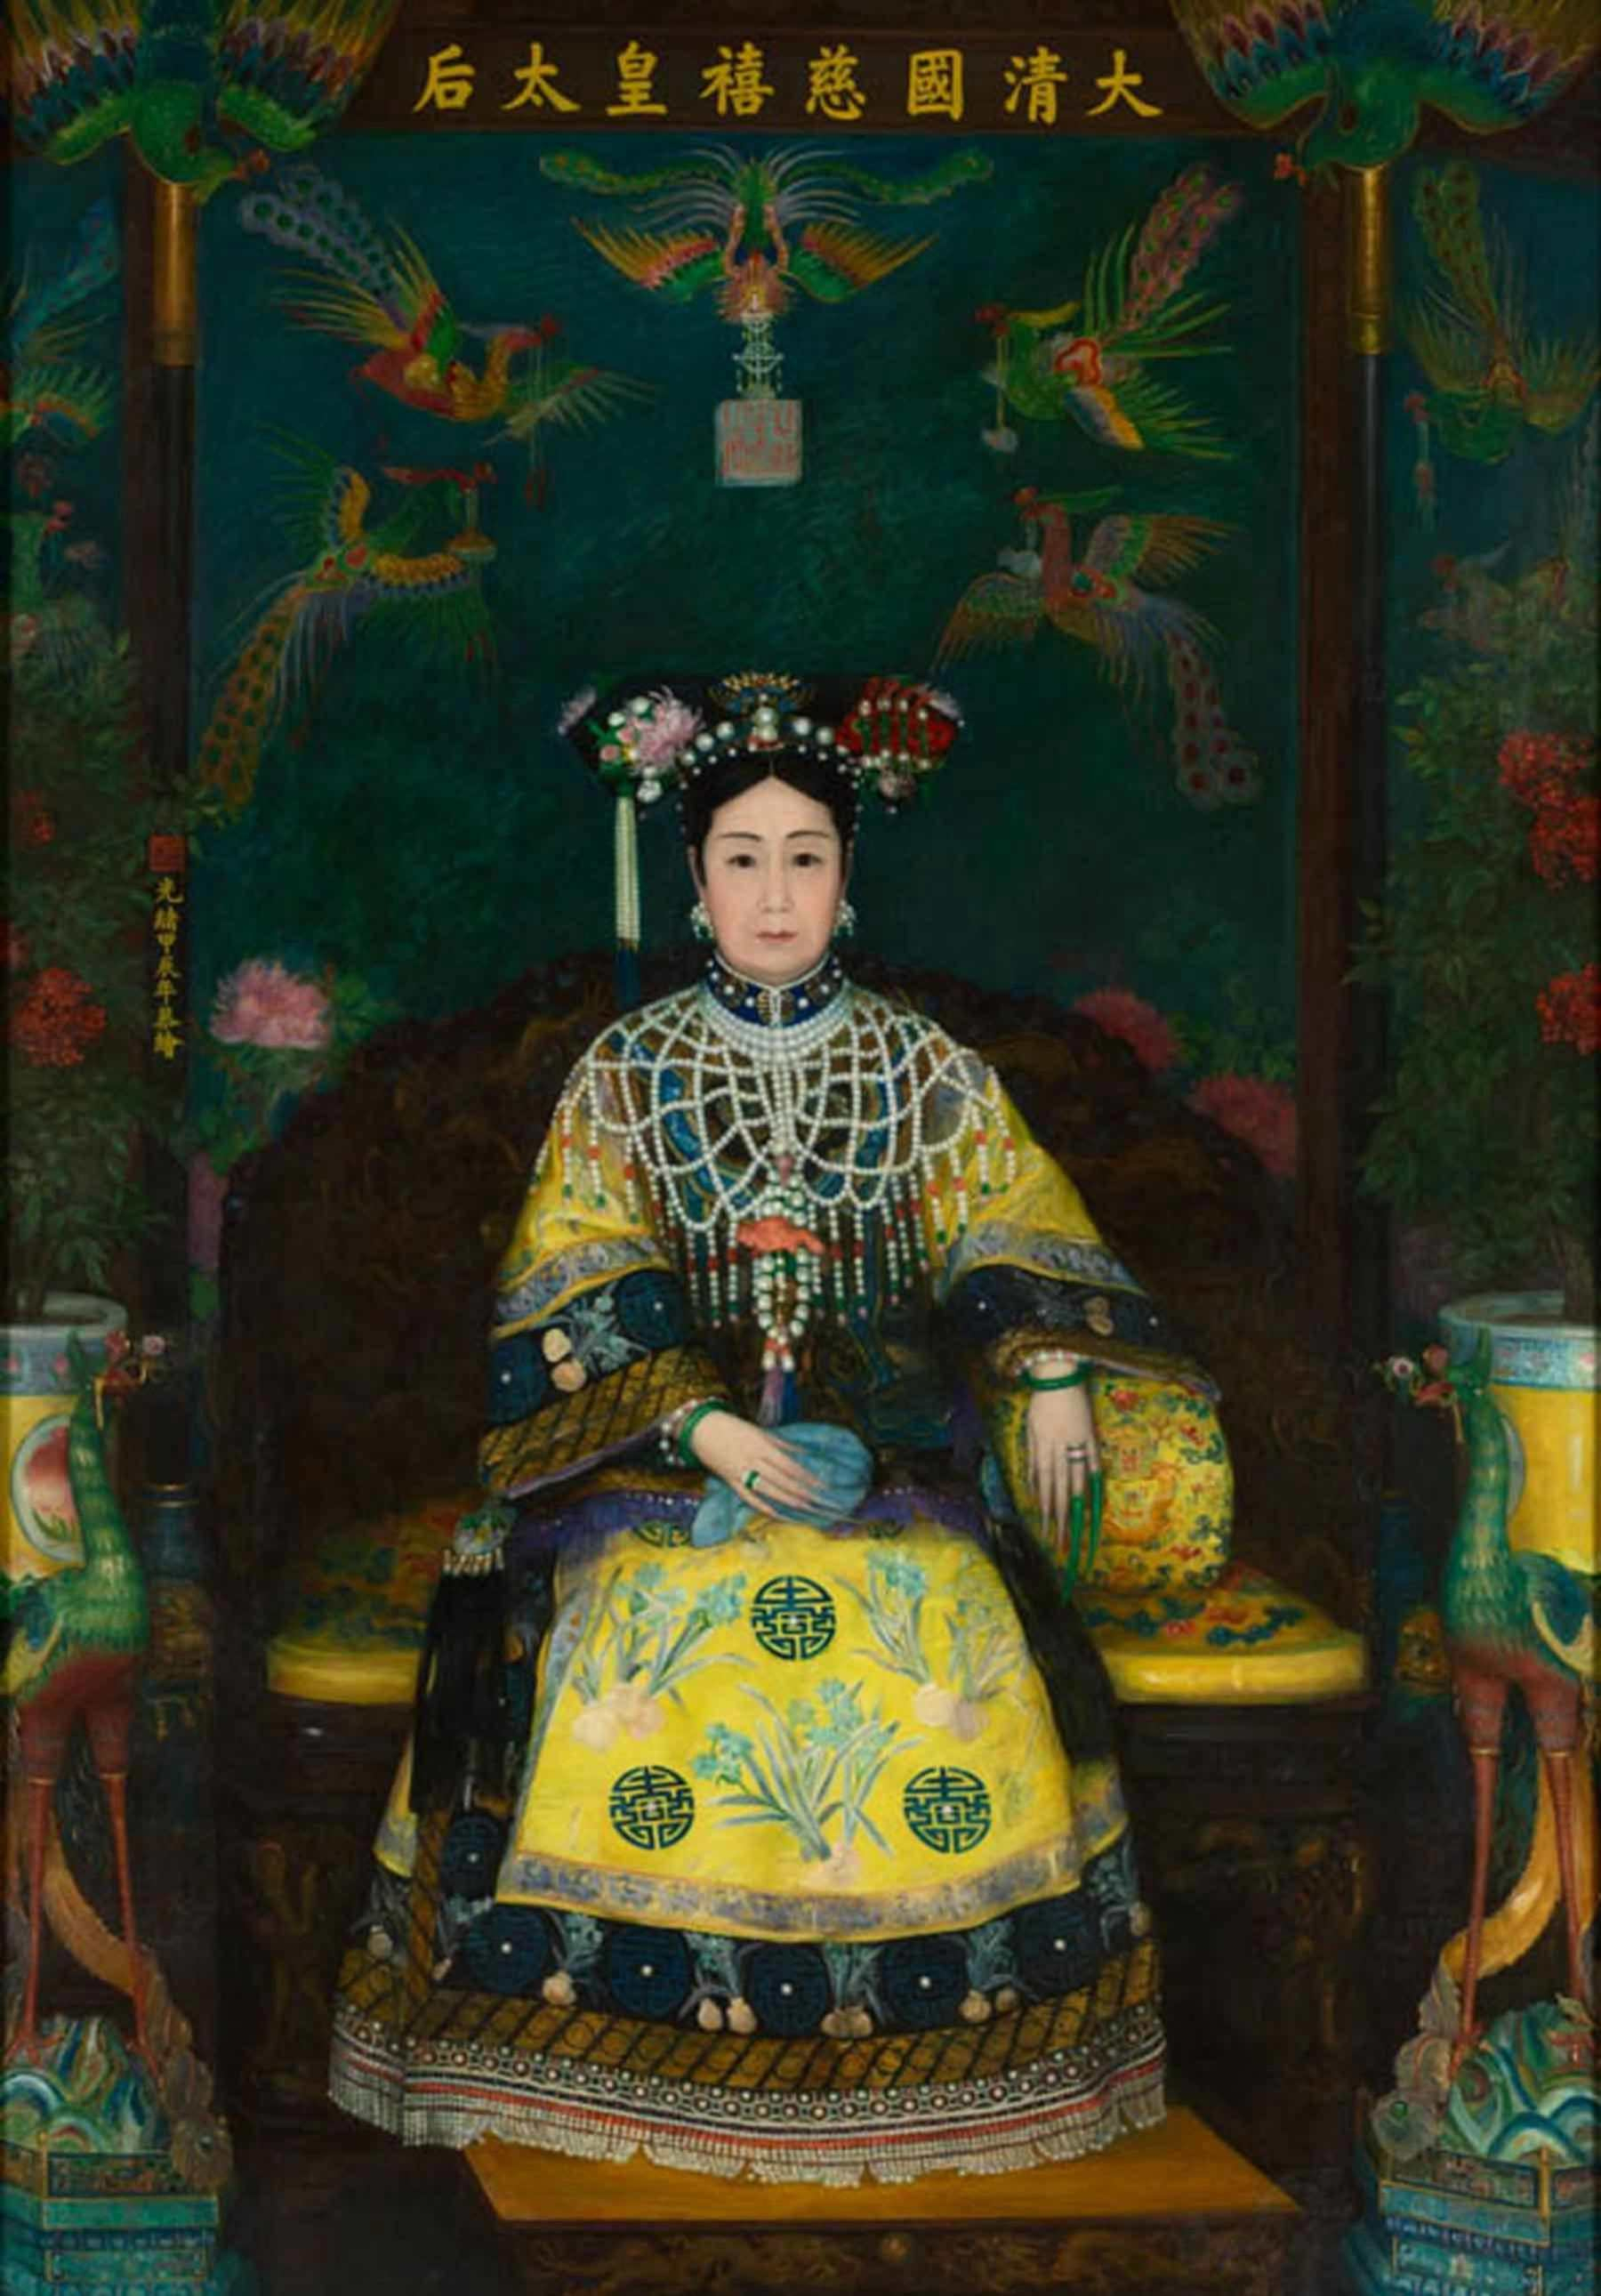 Women Of Forbidden City Empresses Of Qing Dynasty - 